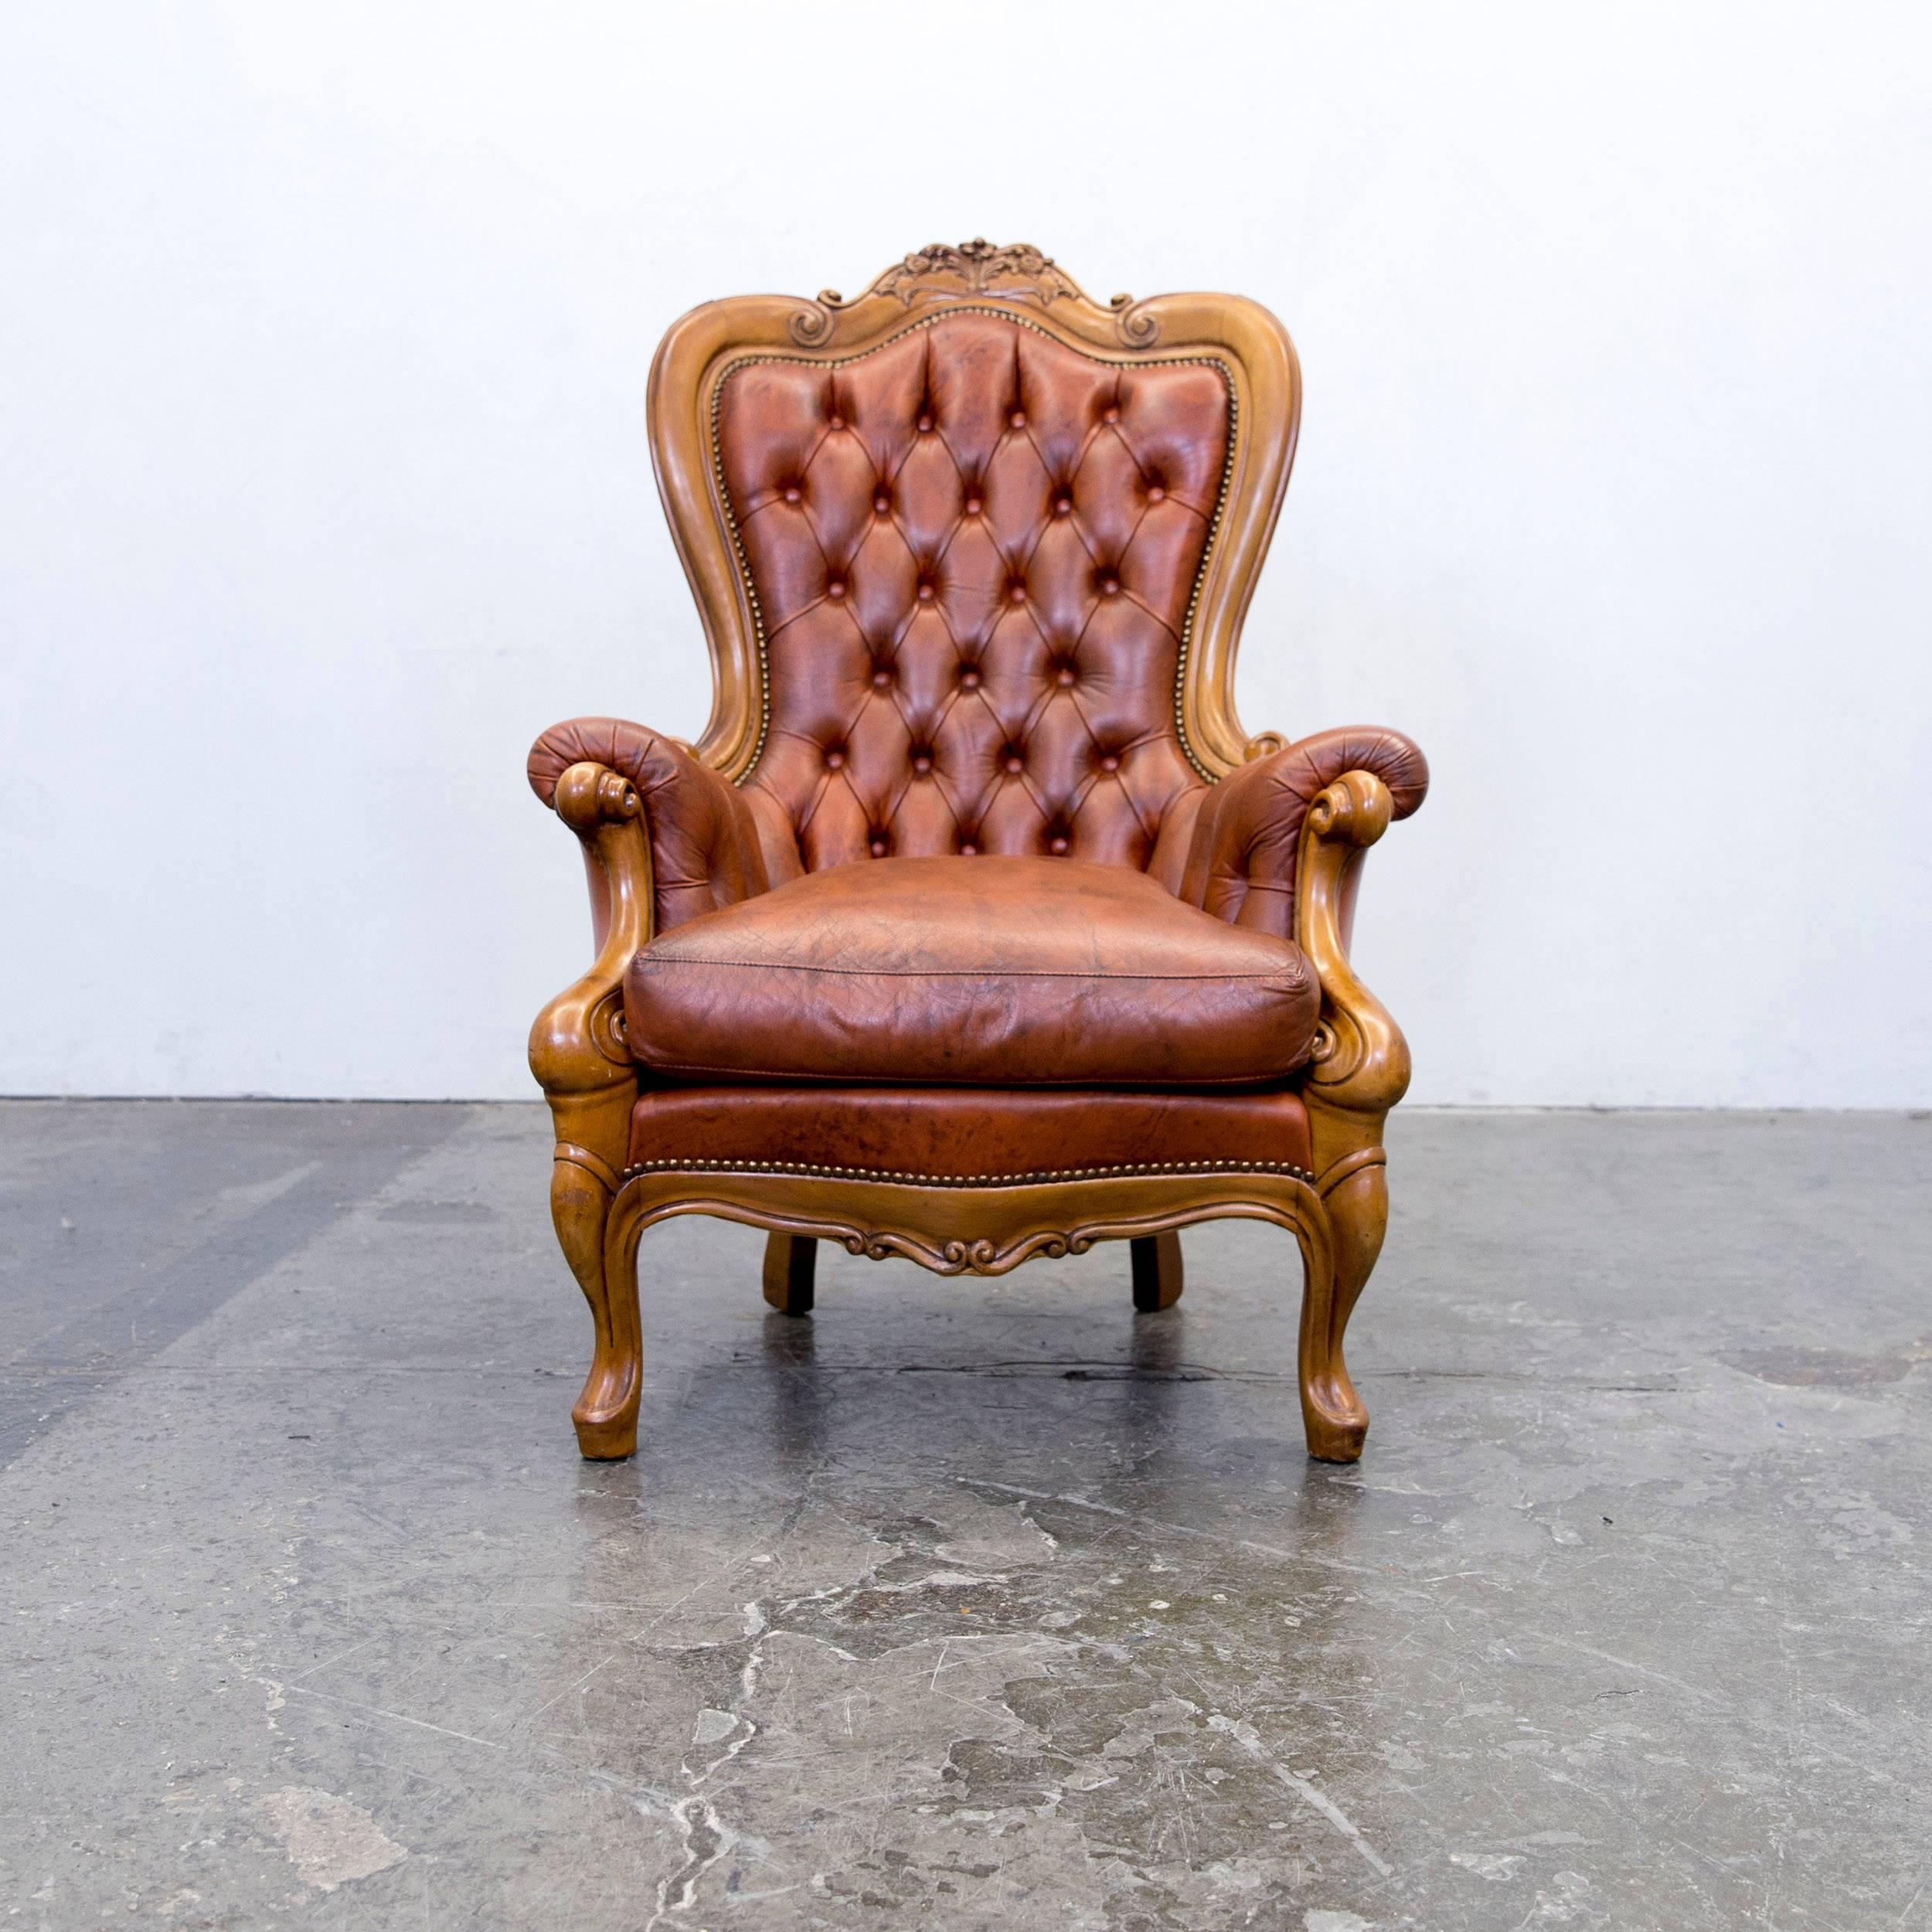 Brown colored original Chesterfield leather armchair, in a vintage design, made for pure comfort.